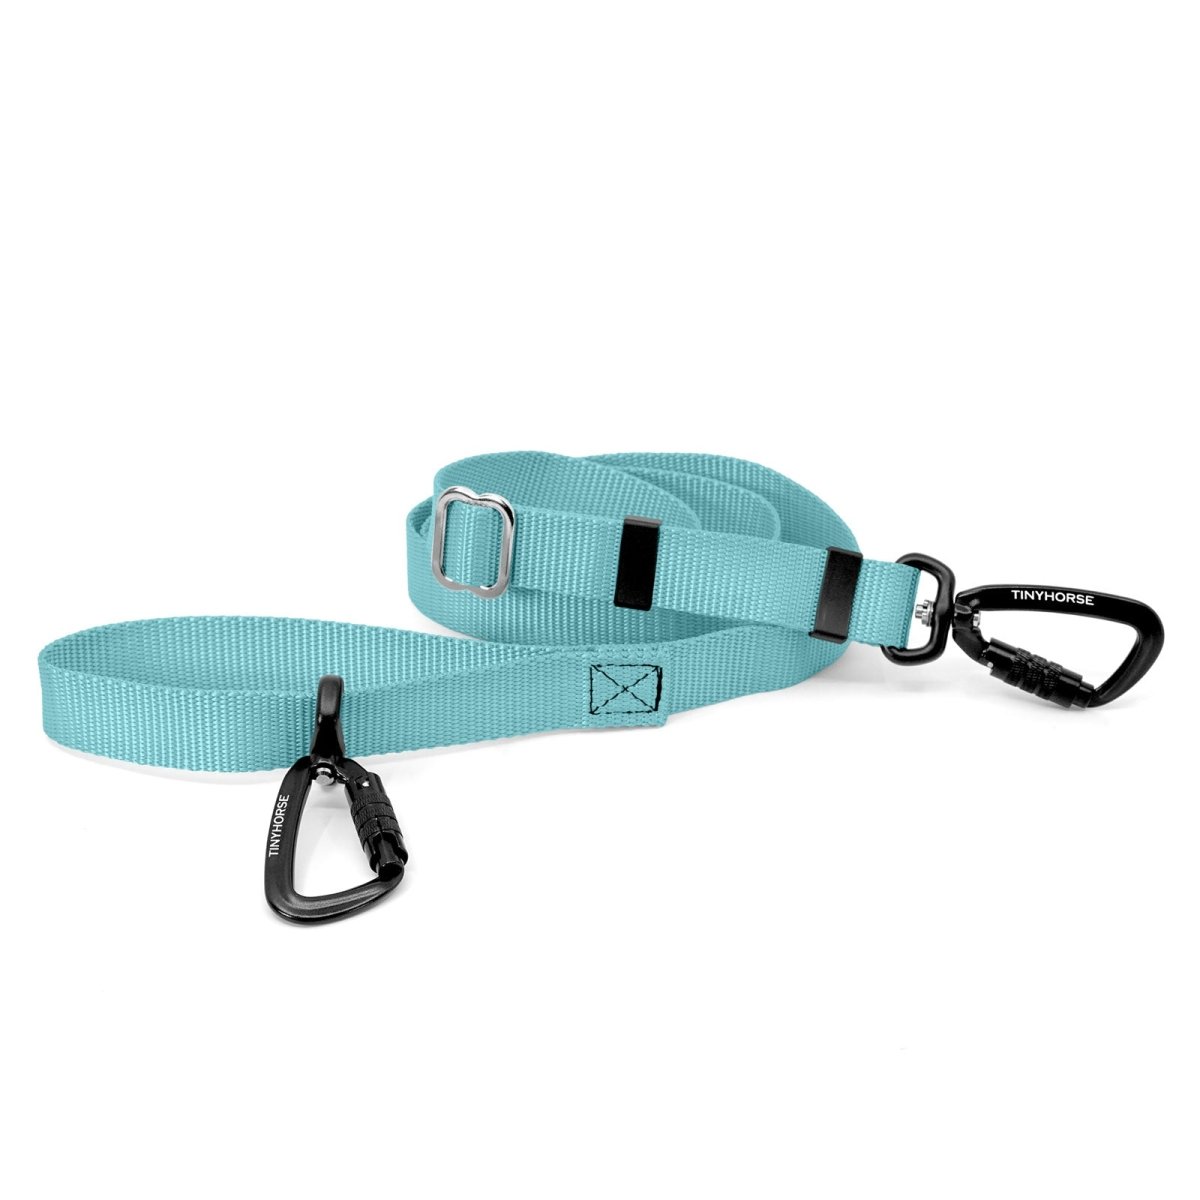 A baby blue-coloured waterproof Lead-All Lite Extra with 2 auto-locking carabiners